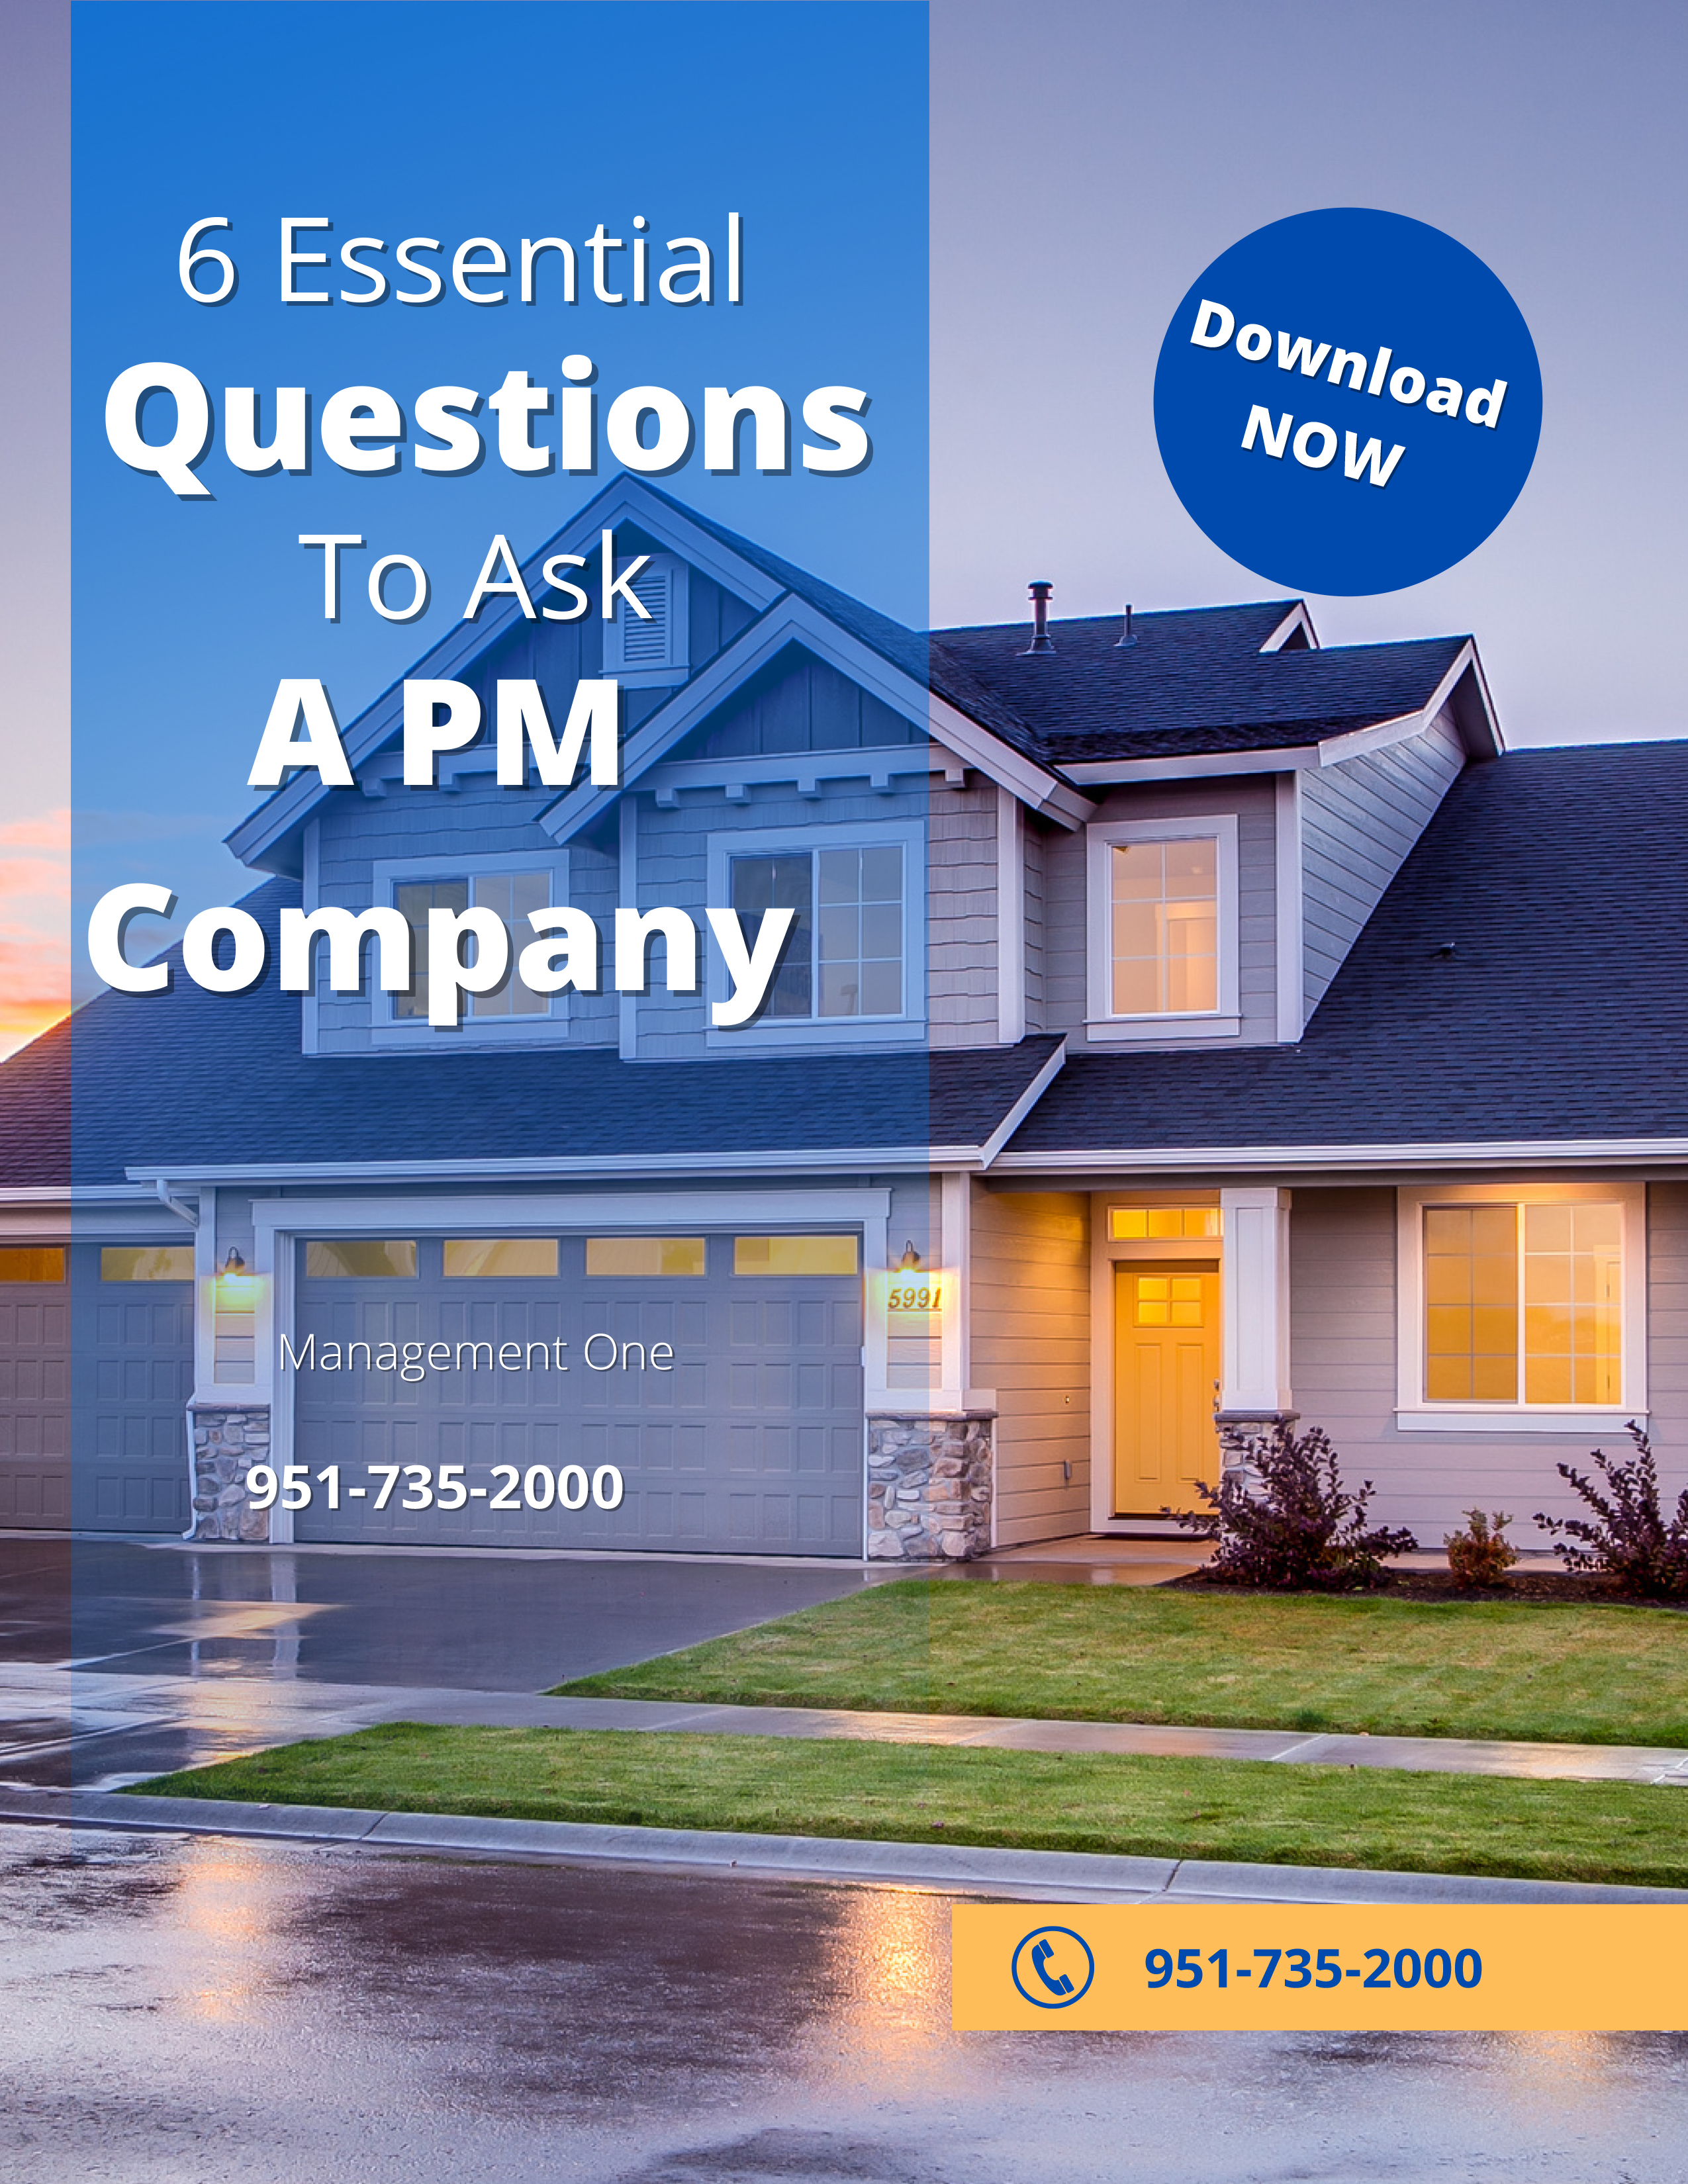 How to Hire A Property Management Company